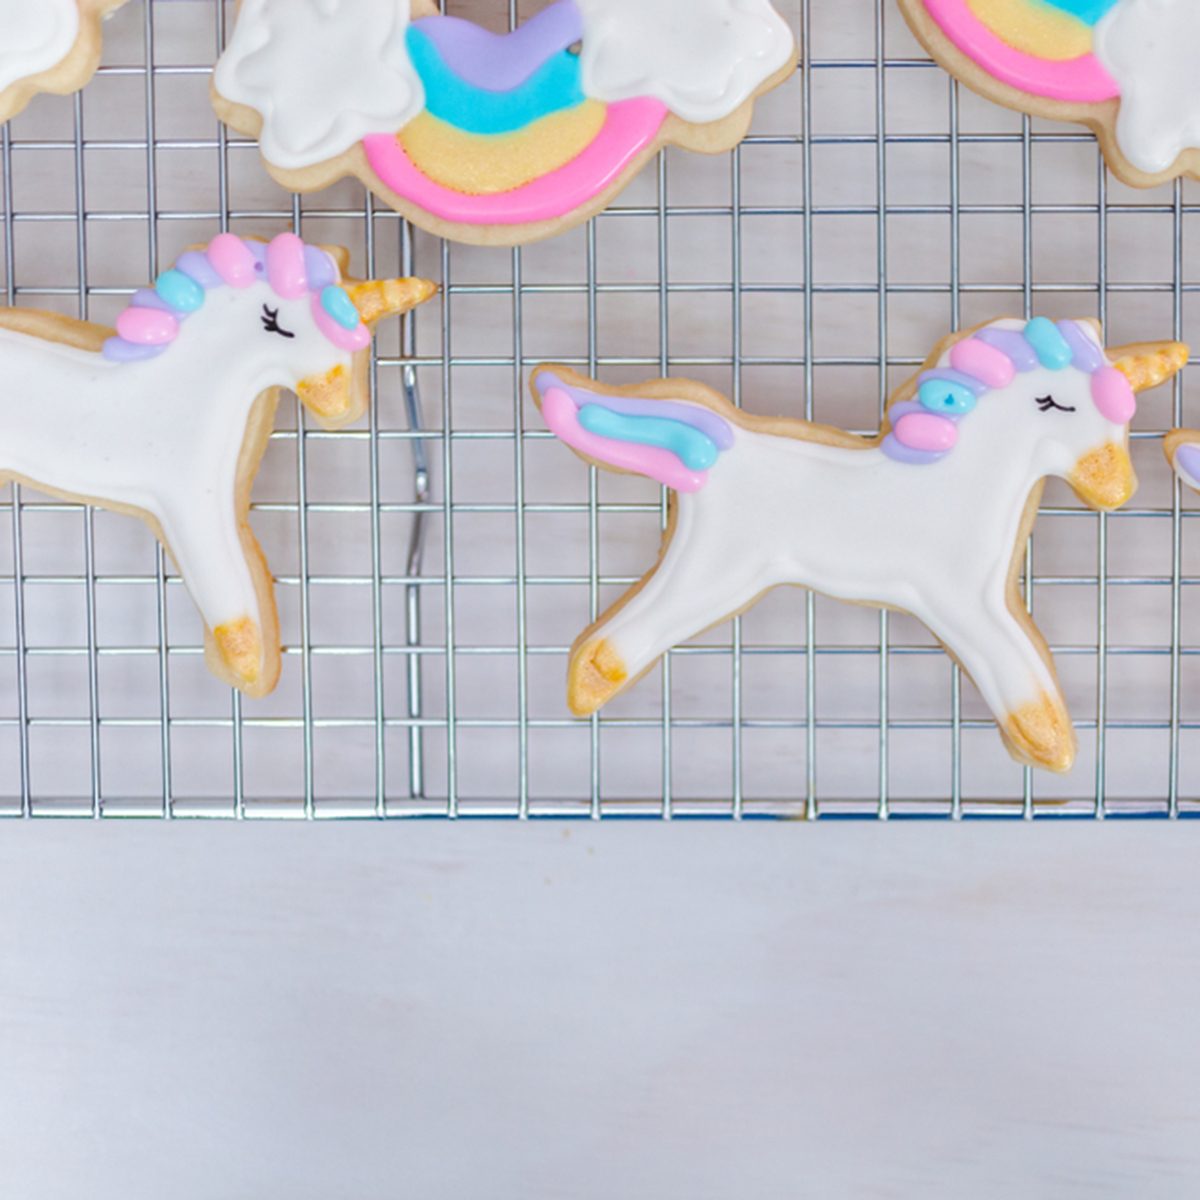 Decorating unicorn themed sugar cookies with royal icing.